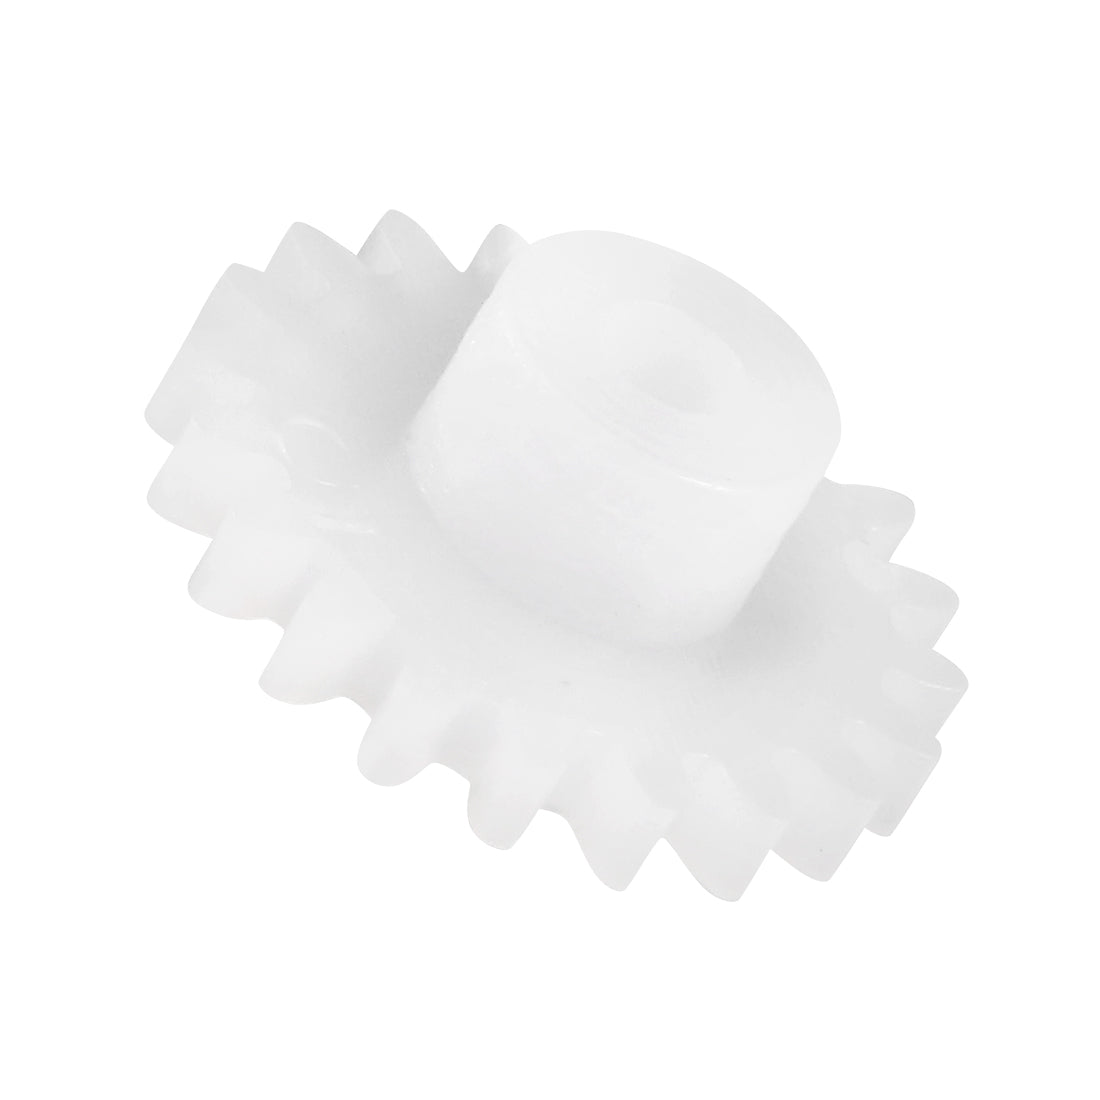 uxcell Uxcell 30Pcs 202A Plastic Gear Accessories with 20 Teeth for DIY Car Robot Motor